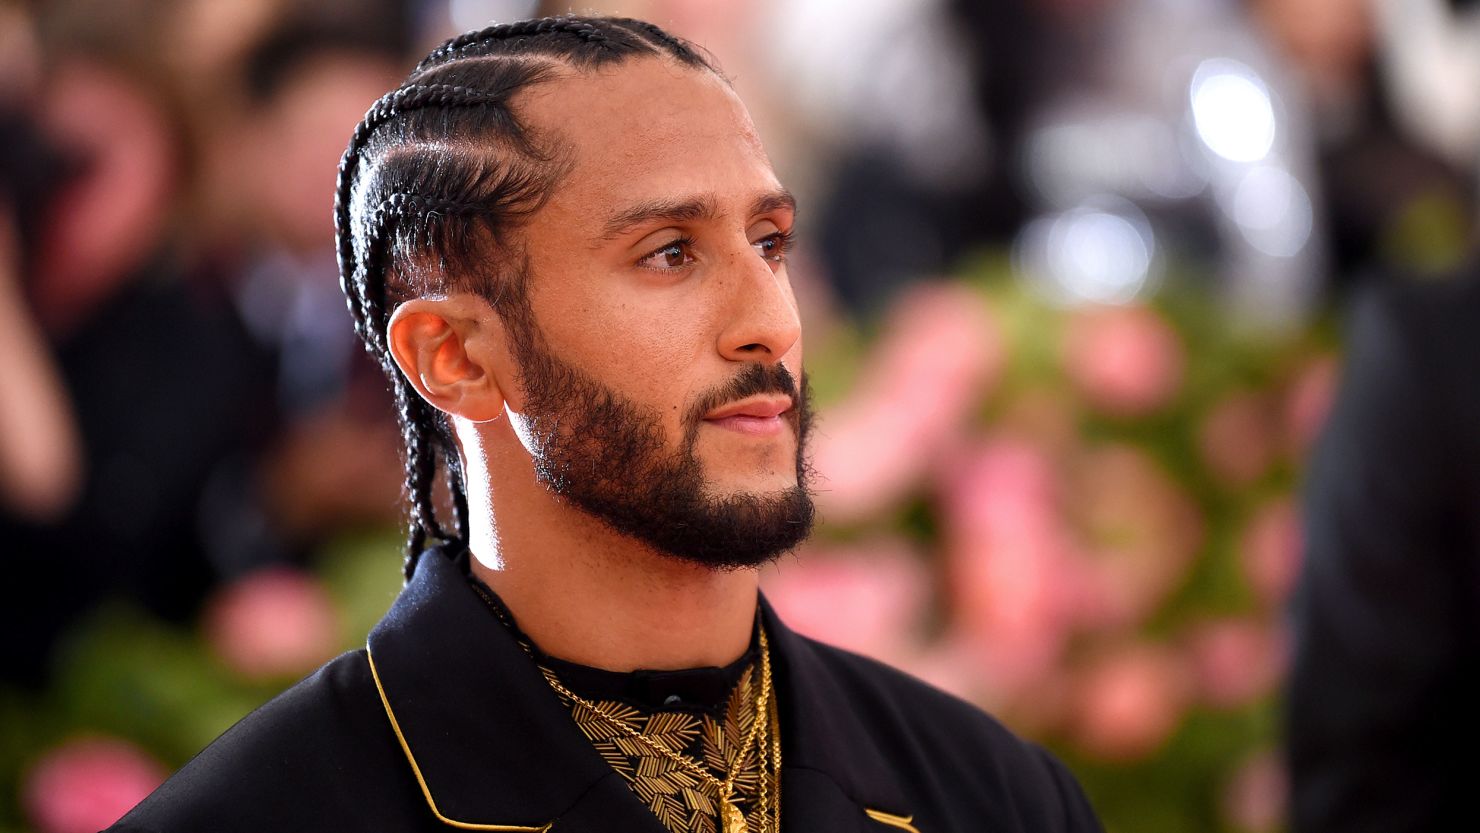 Colin Kaepernick's graphic novel memoir details his high school years before he entered professional sports, according to the publisher.